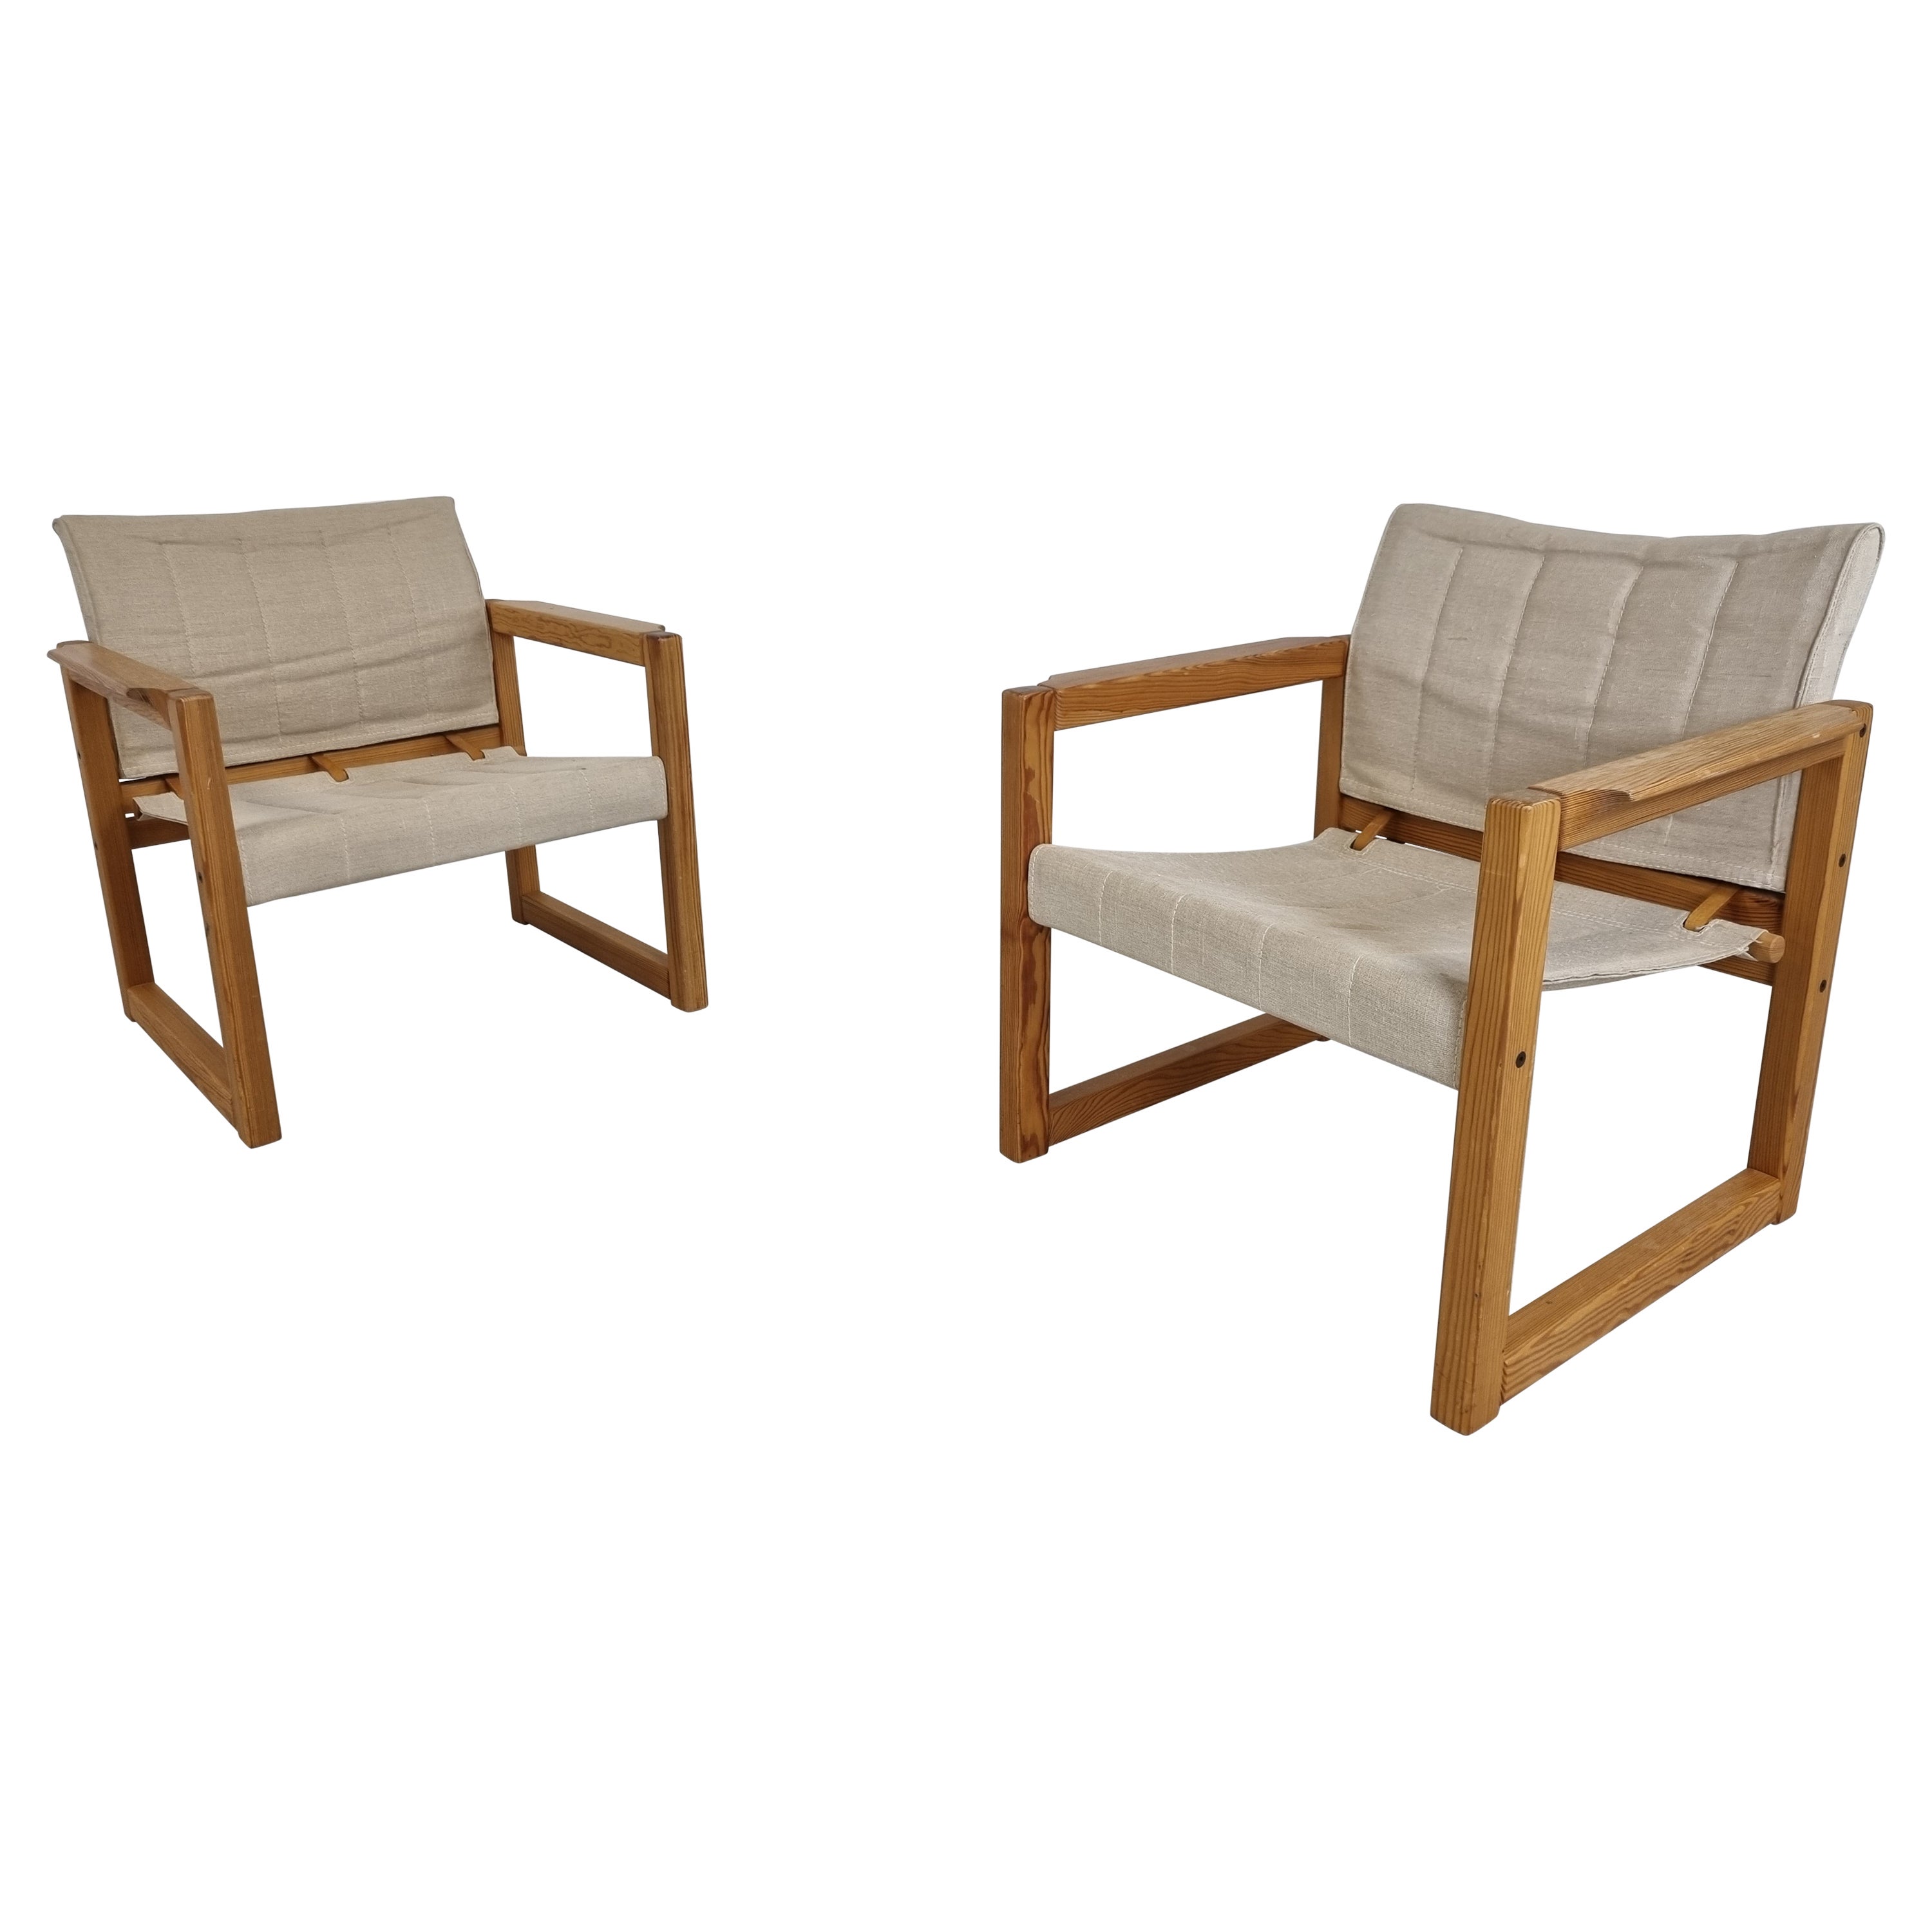 Pair of Diana Armchairs Designed by Karin Mobring for Ikea, 1970s